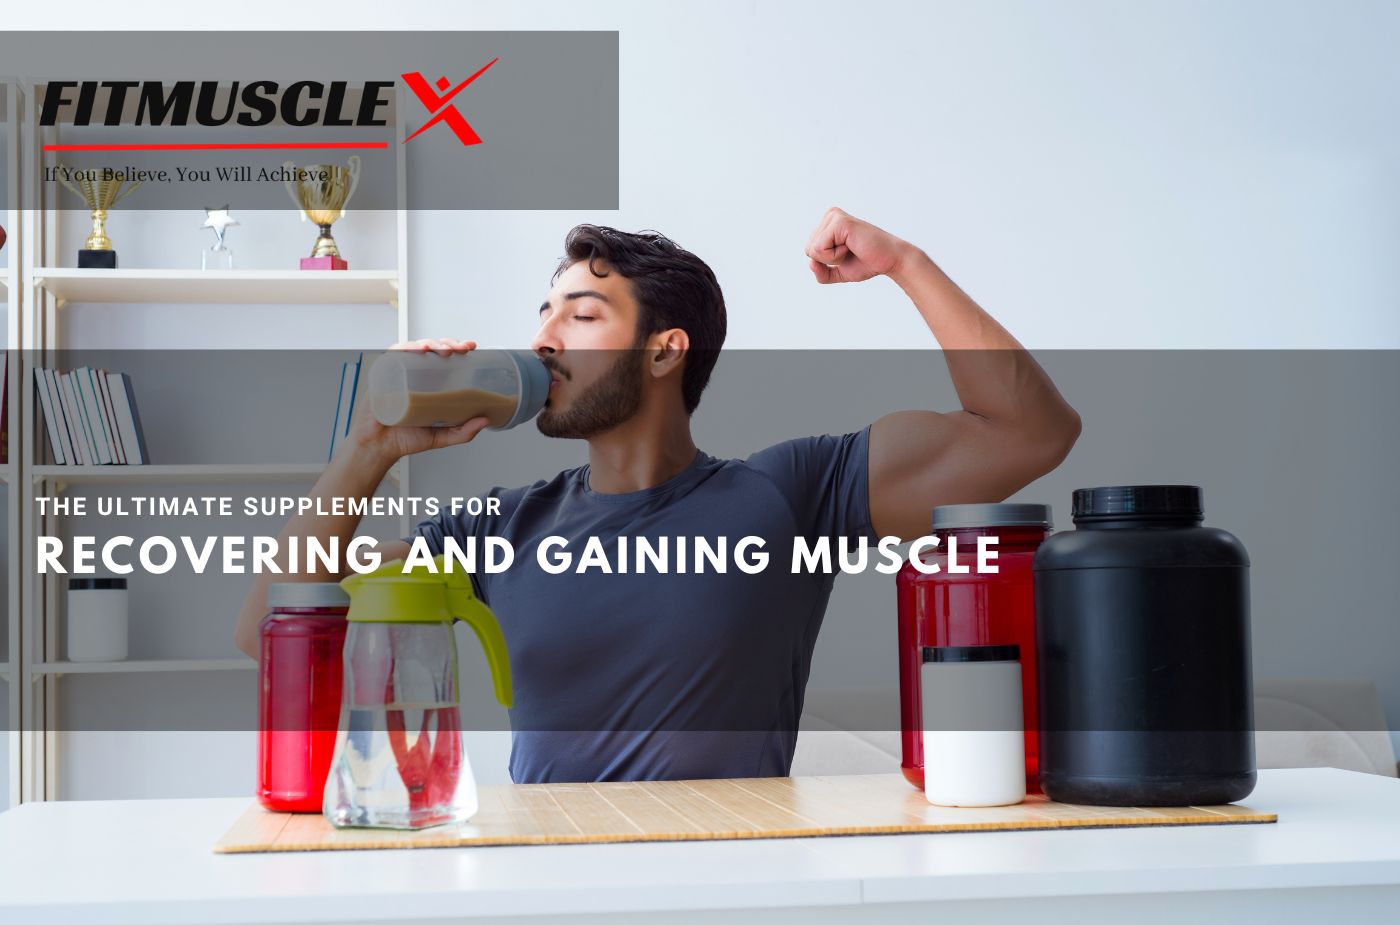 The Ultimate Supplements for Recovering and Gaining Muscle